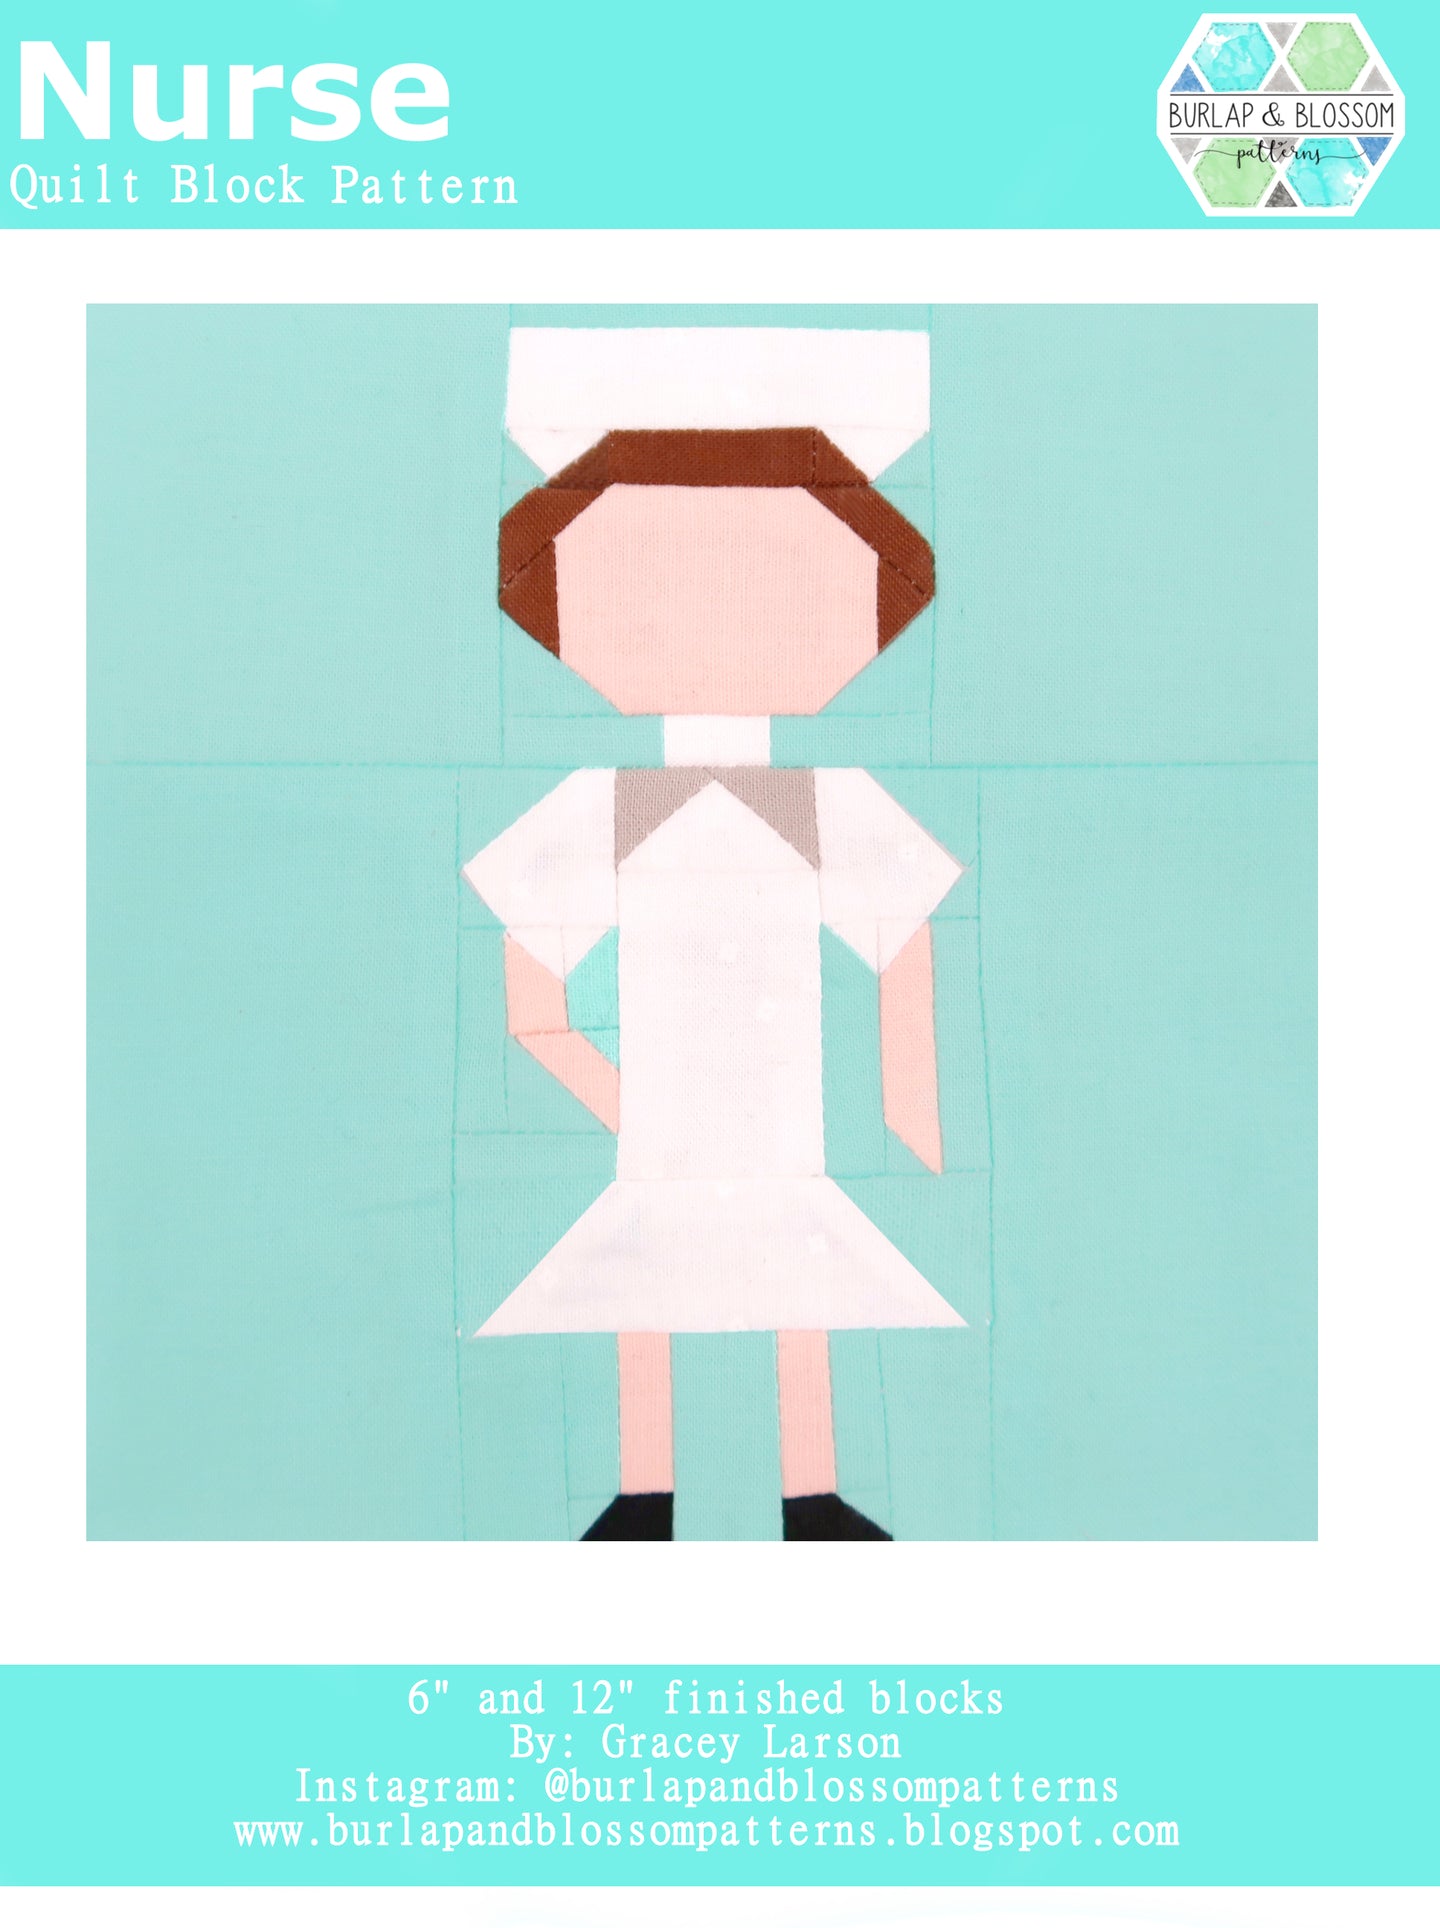 Pattern, Nurse Quilt Block by Burlap and Blossom (digital download)